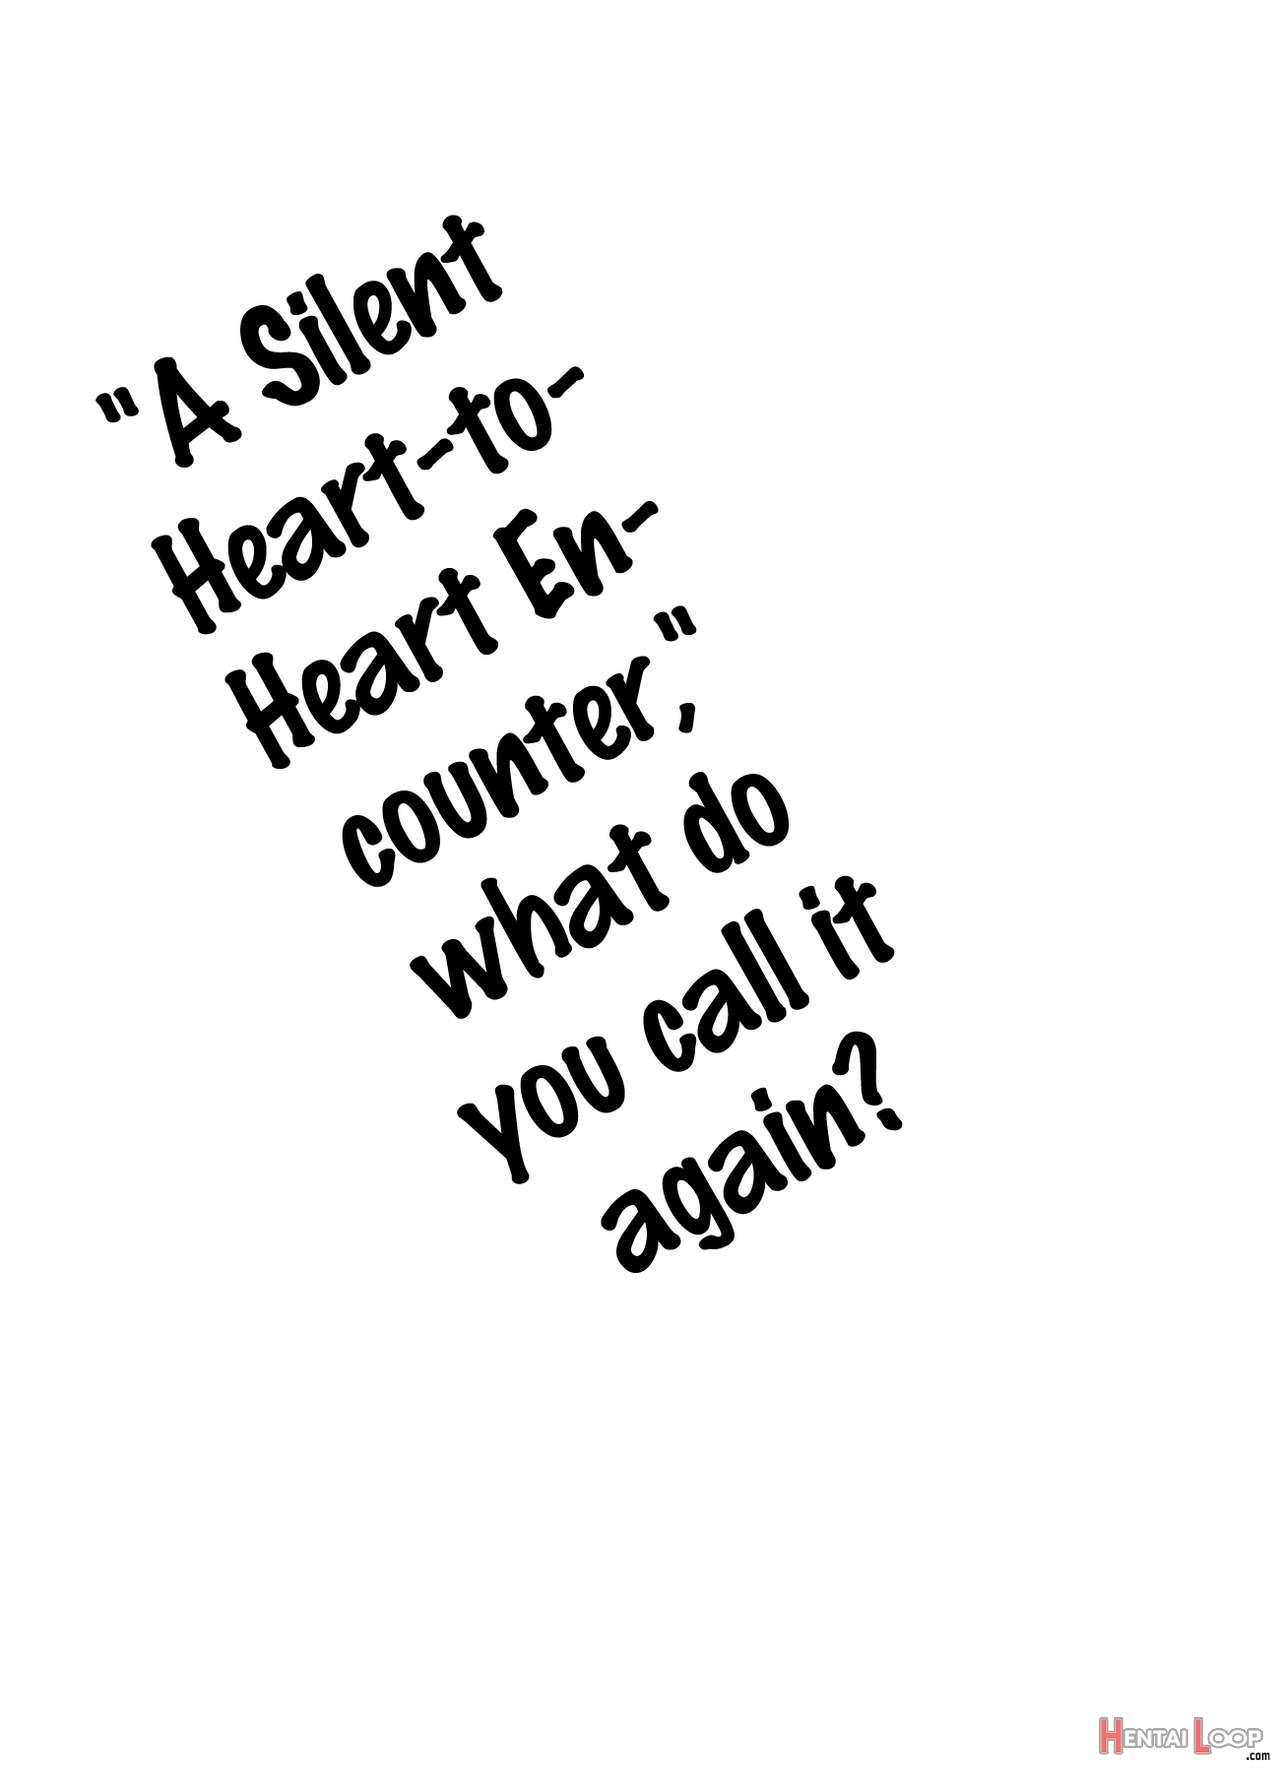 "a Silent Heartheart Encounter," What Do You Call It Again? page 4